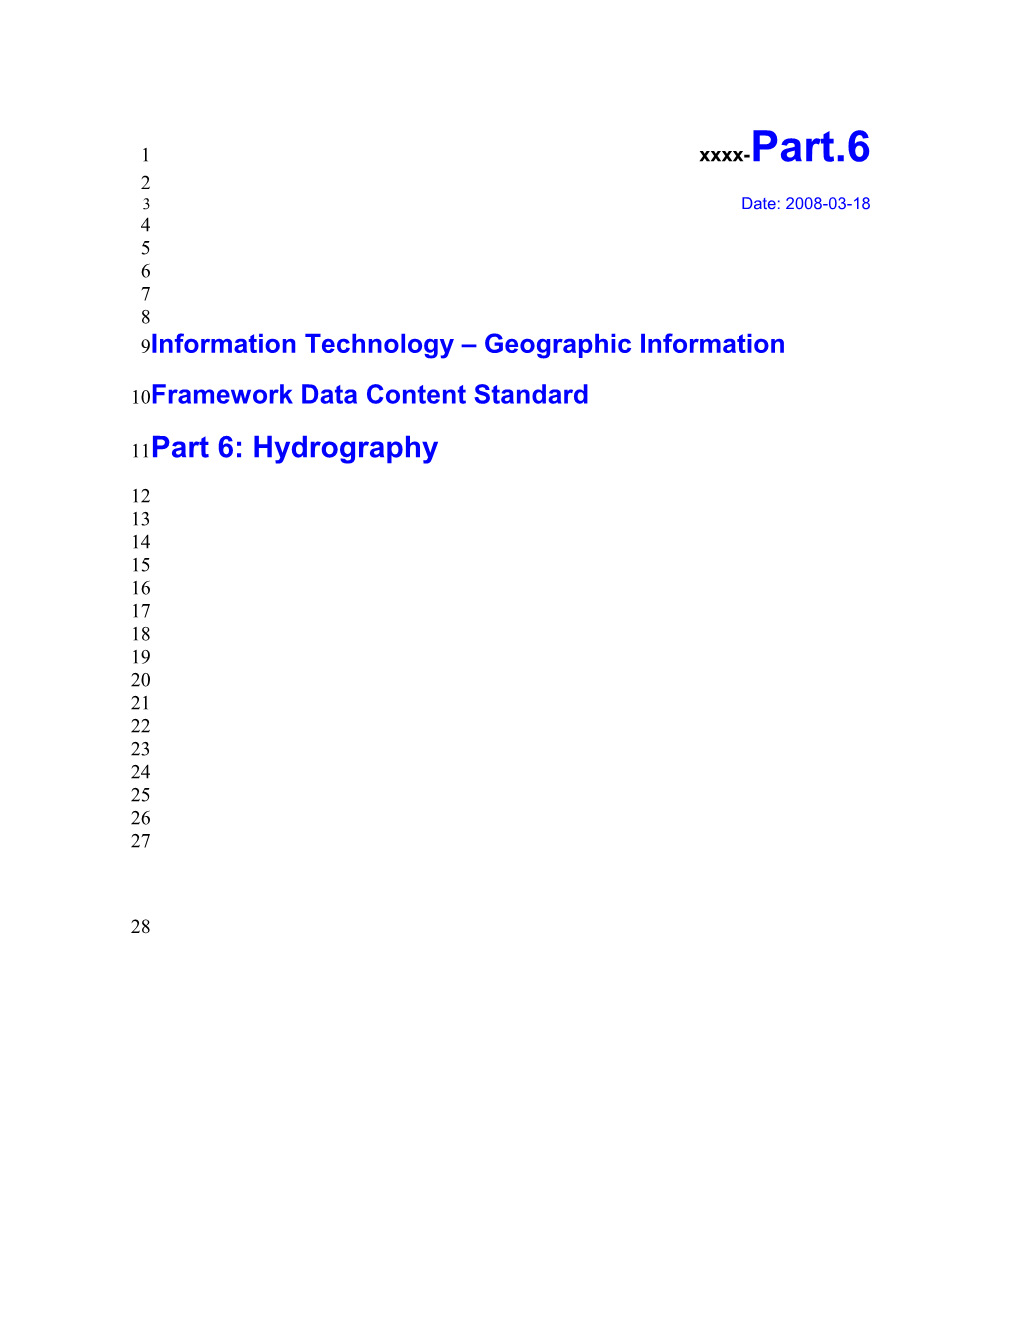 Information Technology Geographic Information